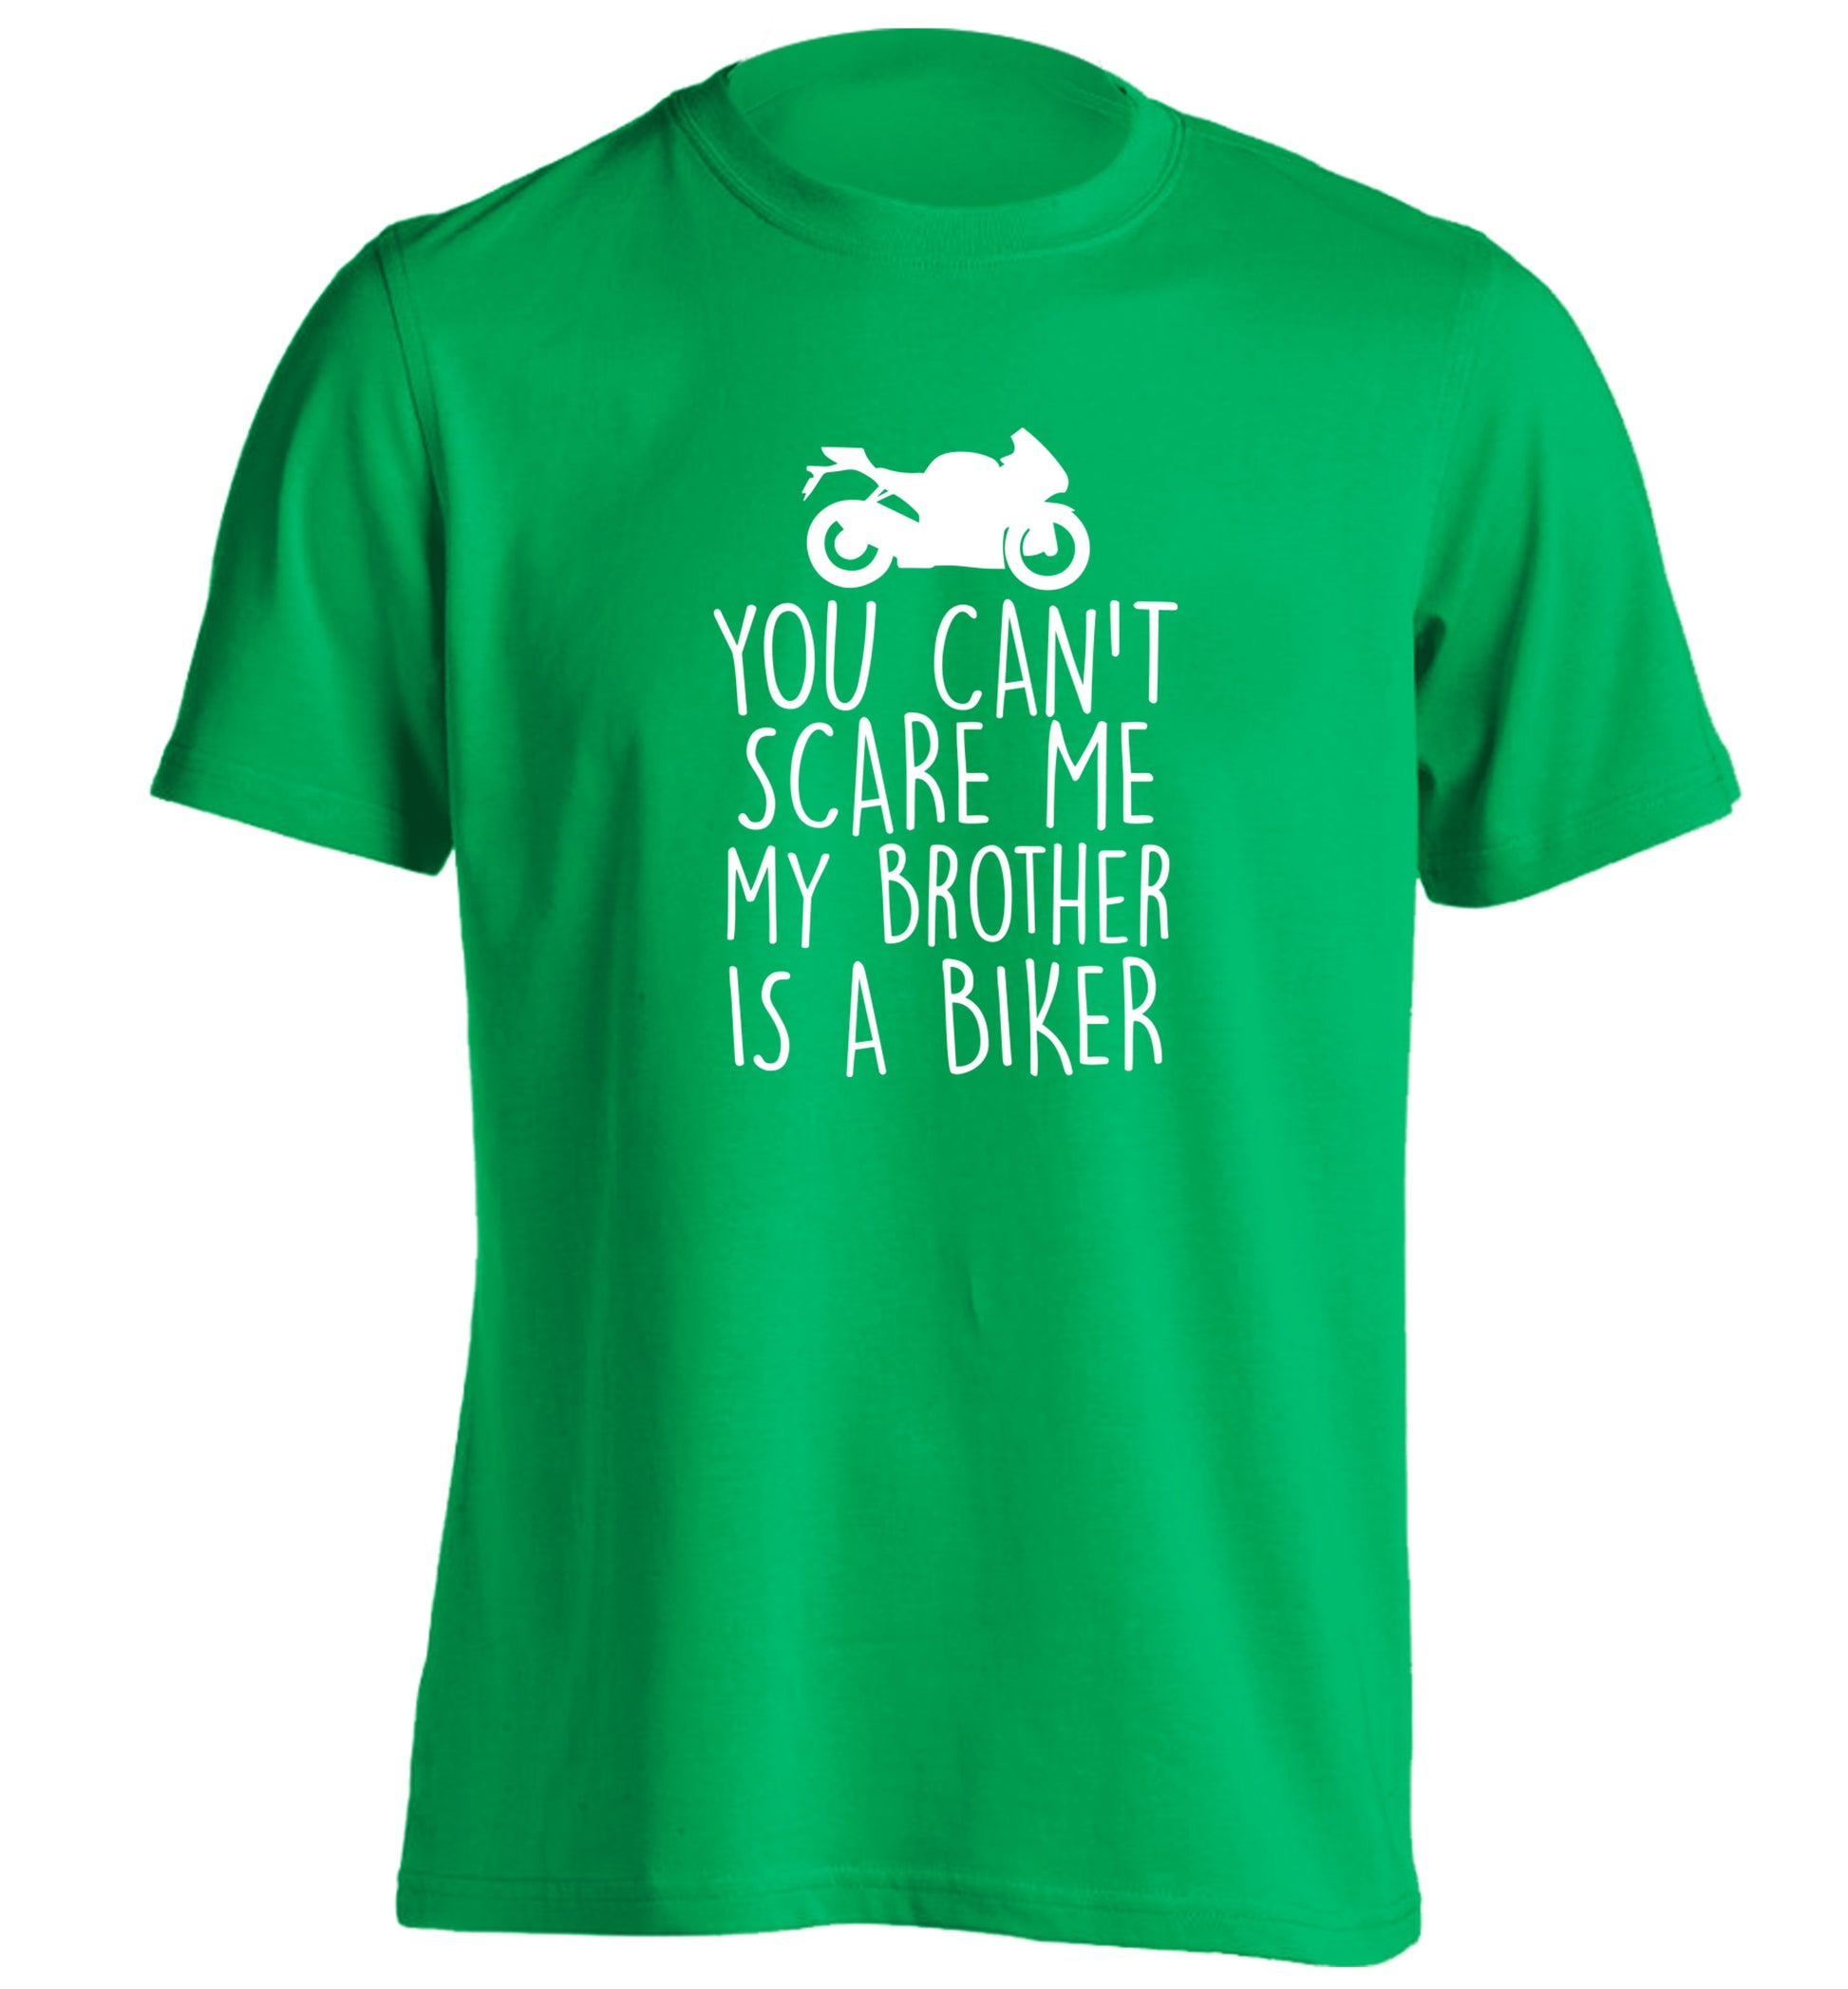 You can't scare me my brother is a biker adults unisex green Tshirt 2XL